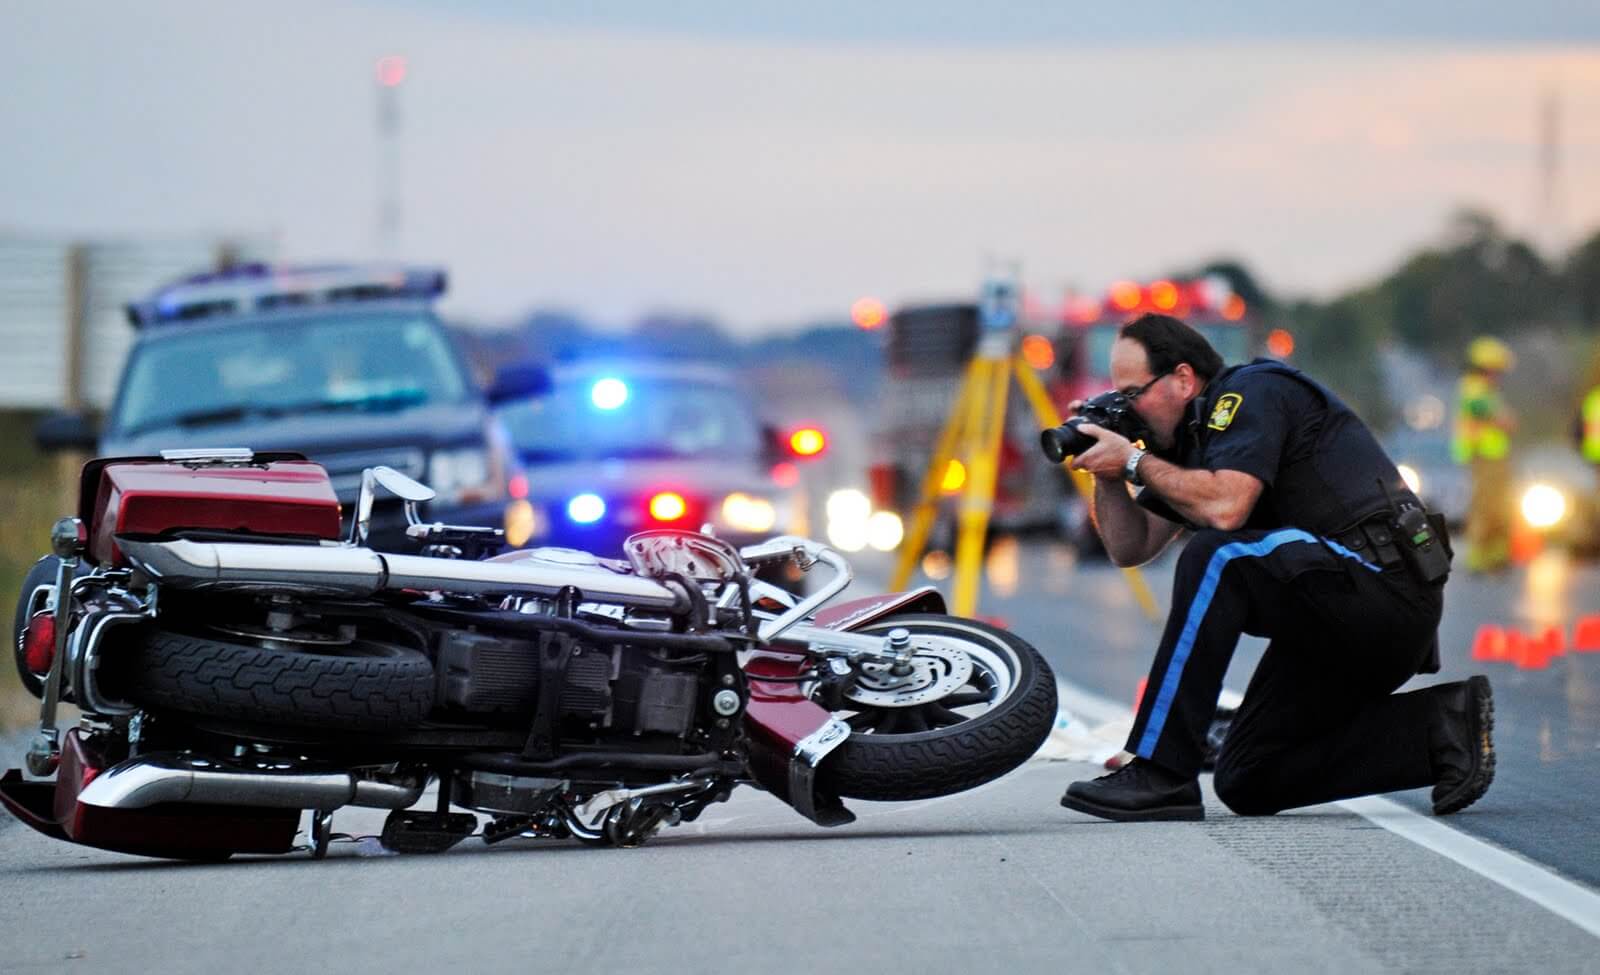 motorcycle accident tips